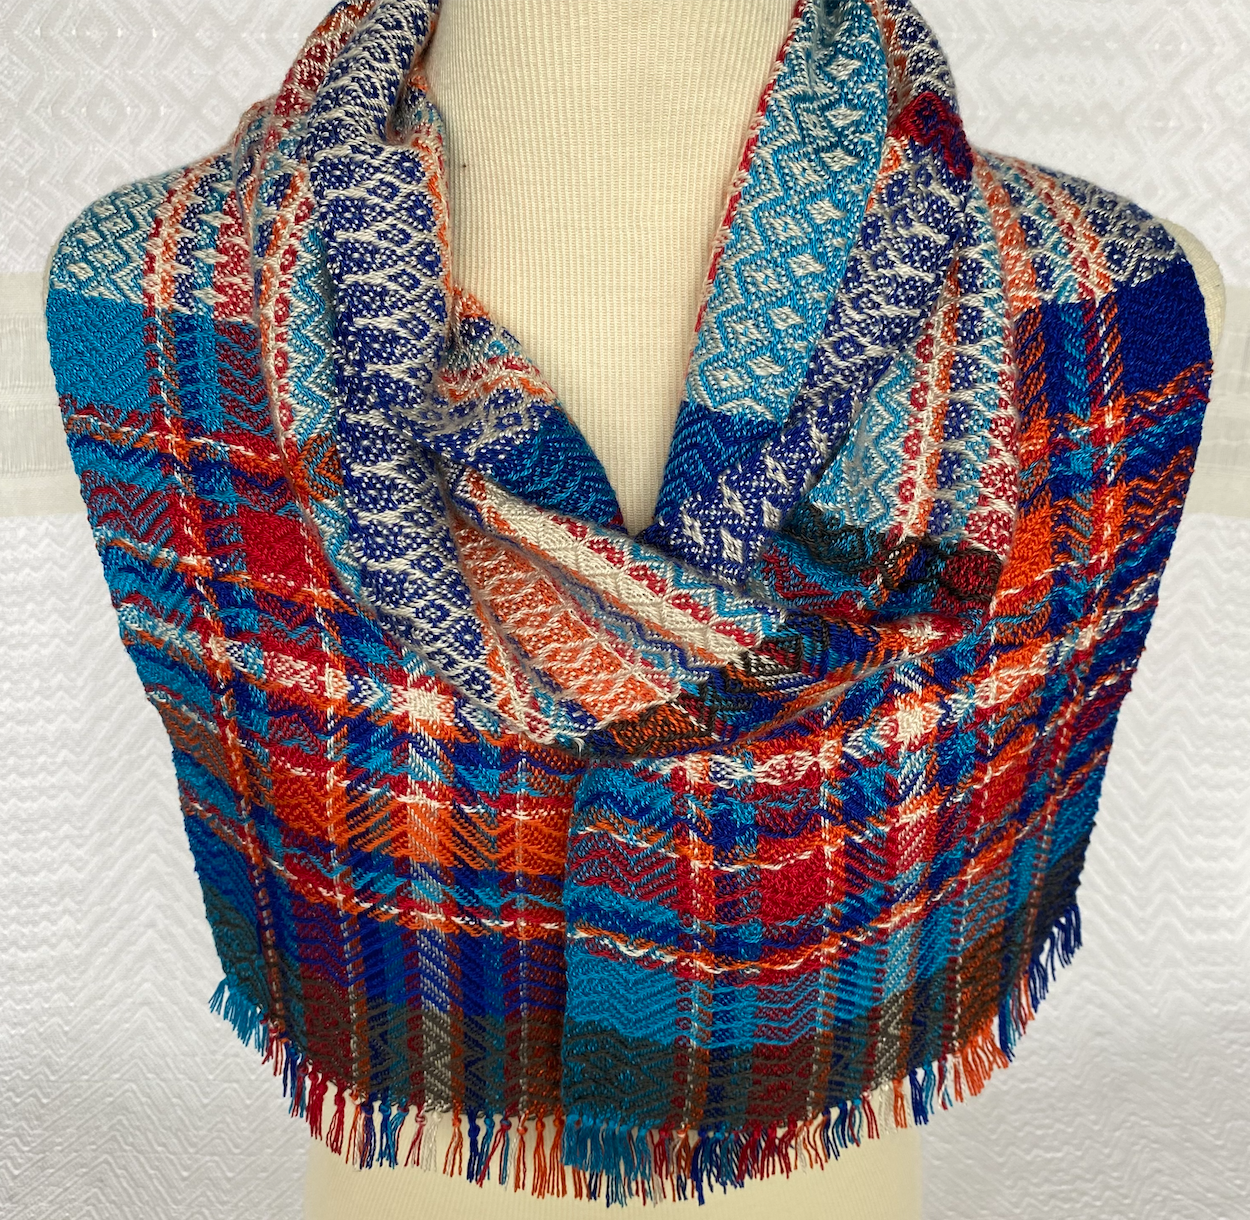  Stripes of Blue, Red, Orange and Cream Twill Plaid Handwoven Scarf   